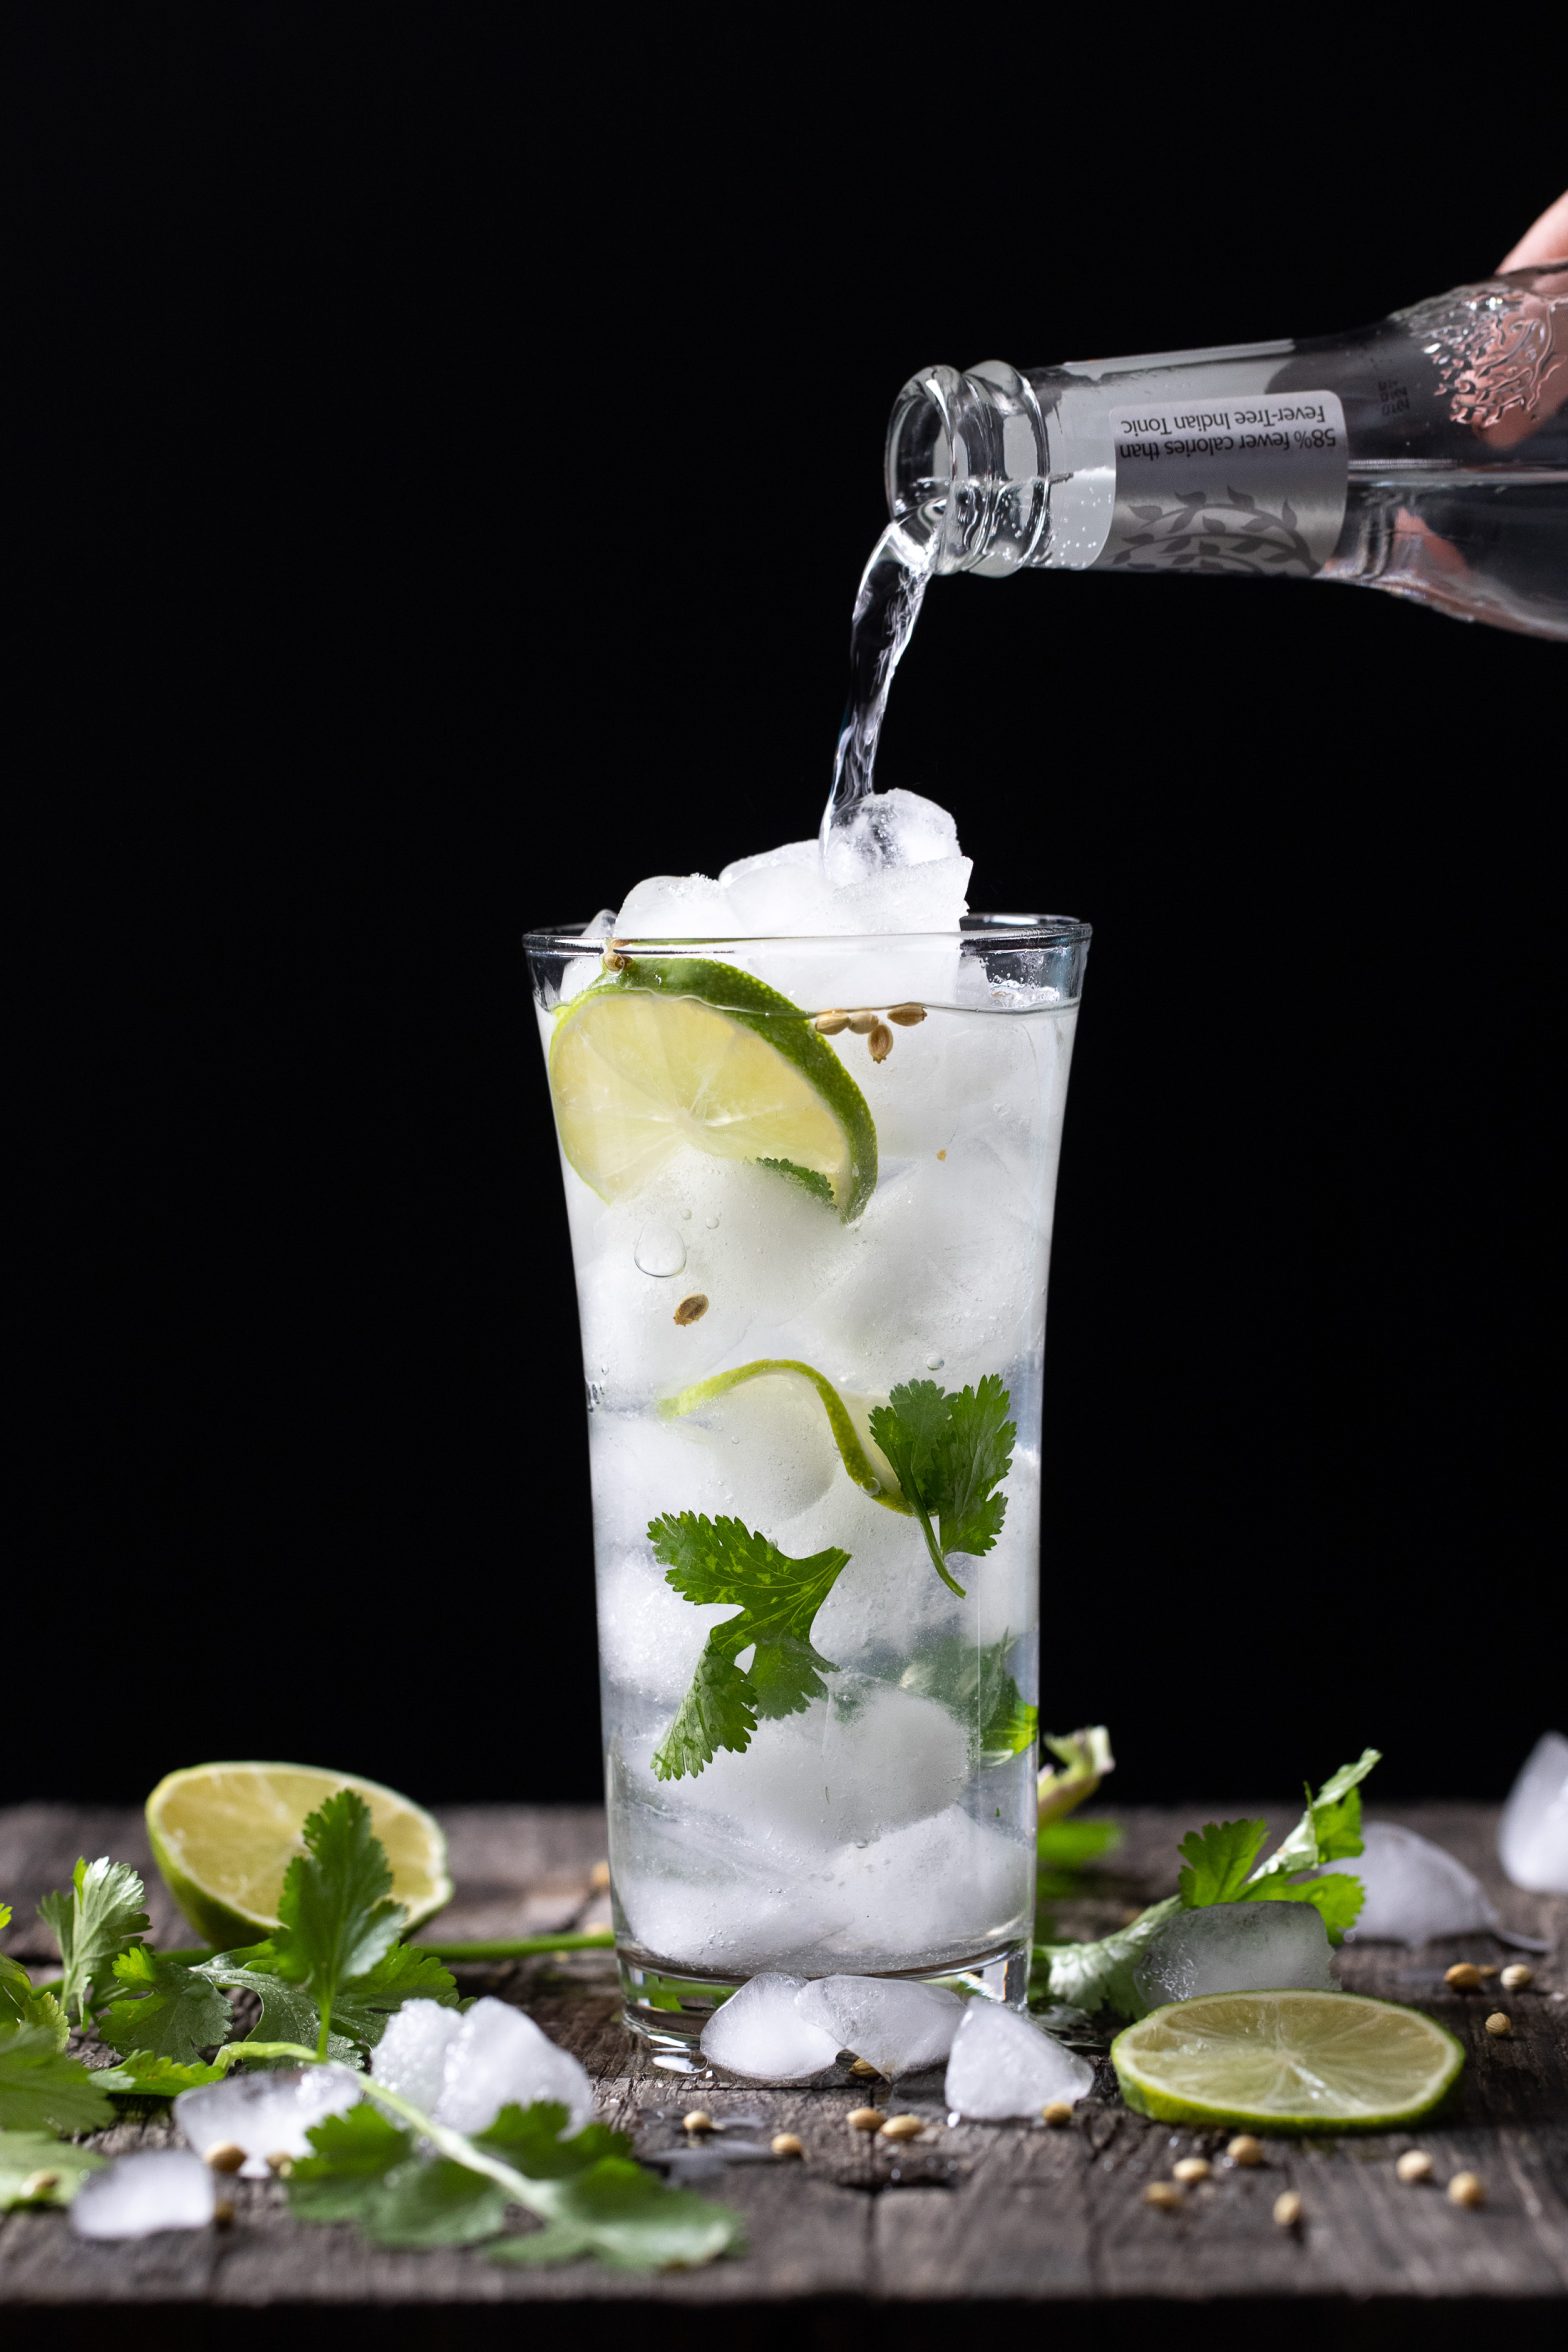 Pouring tonic into the cilantro gin and tonic